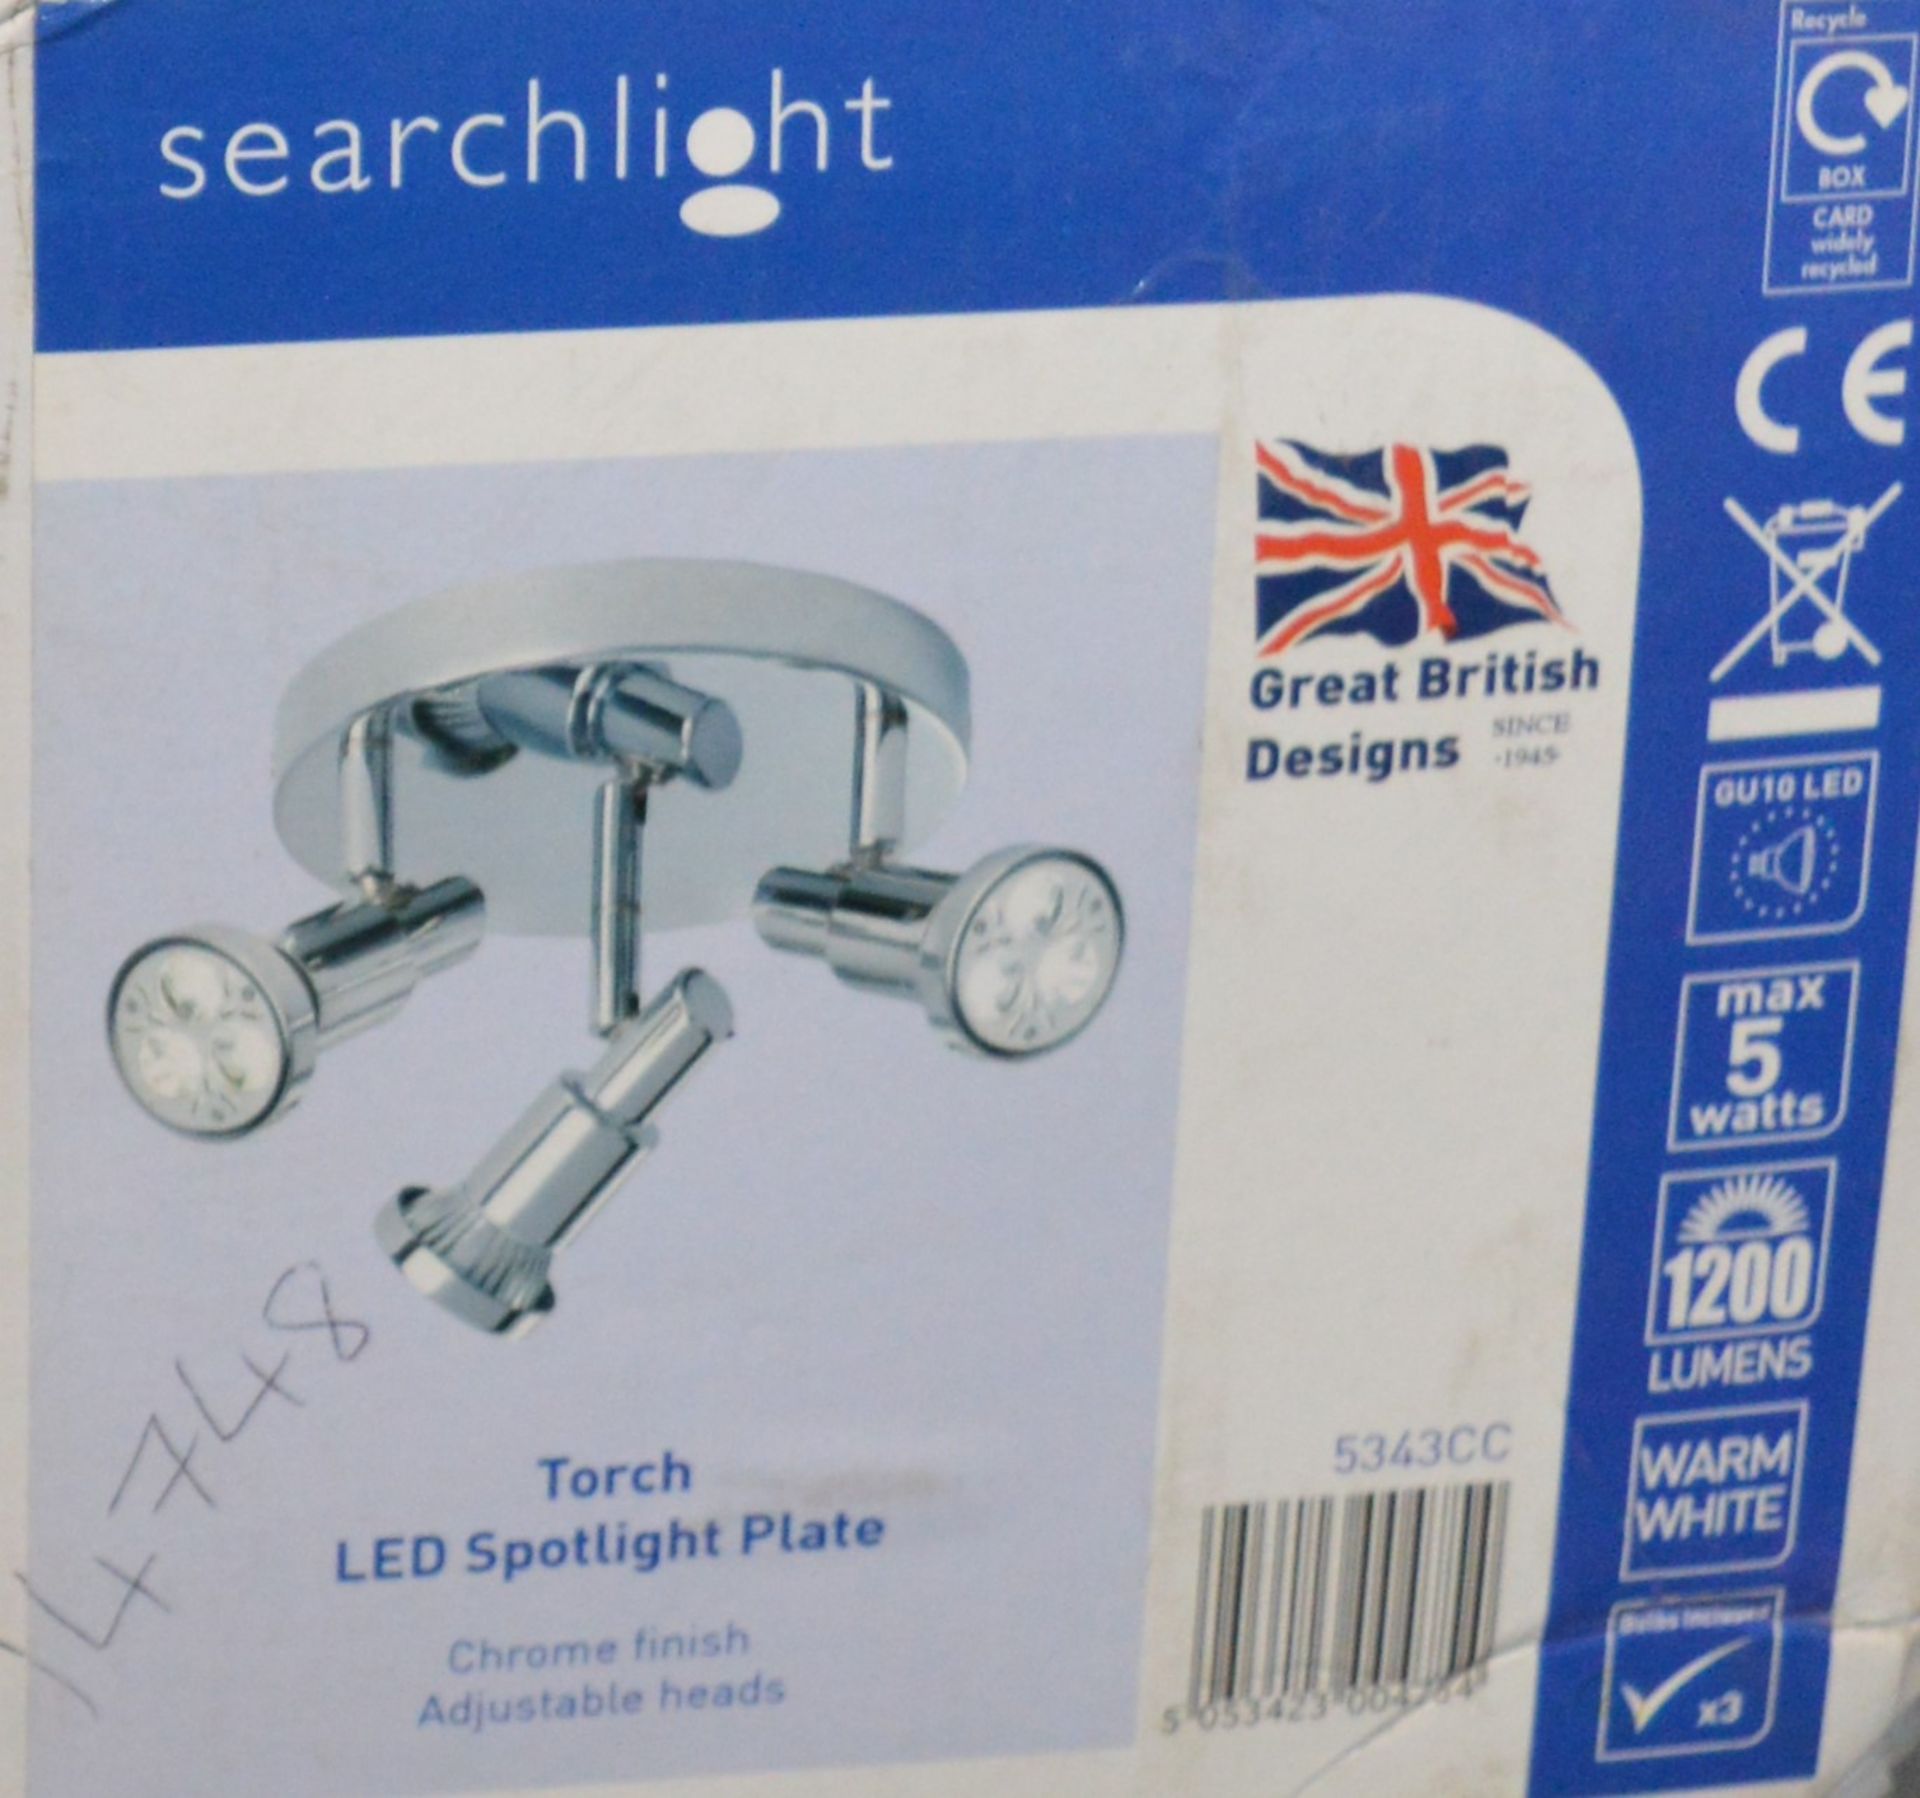 2 x Searchlight Torch LED 3 Light Spotlights in Chrome - Product Code 5343CC - New Boxed Stock -